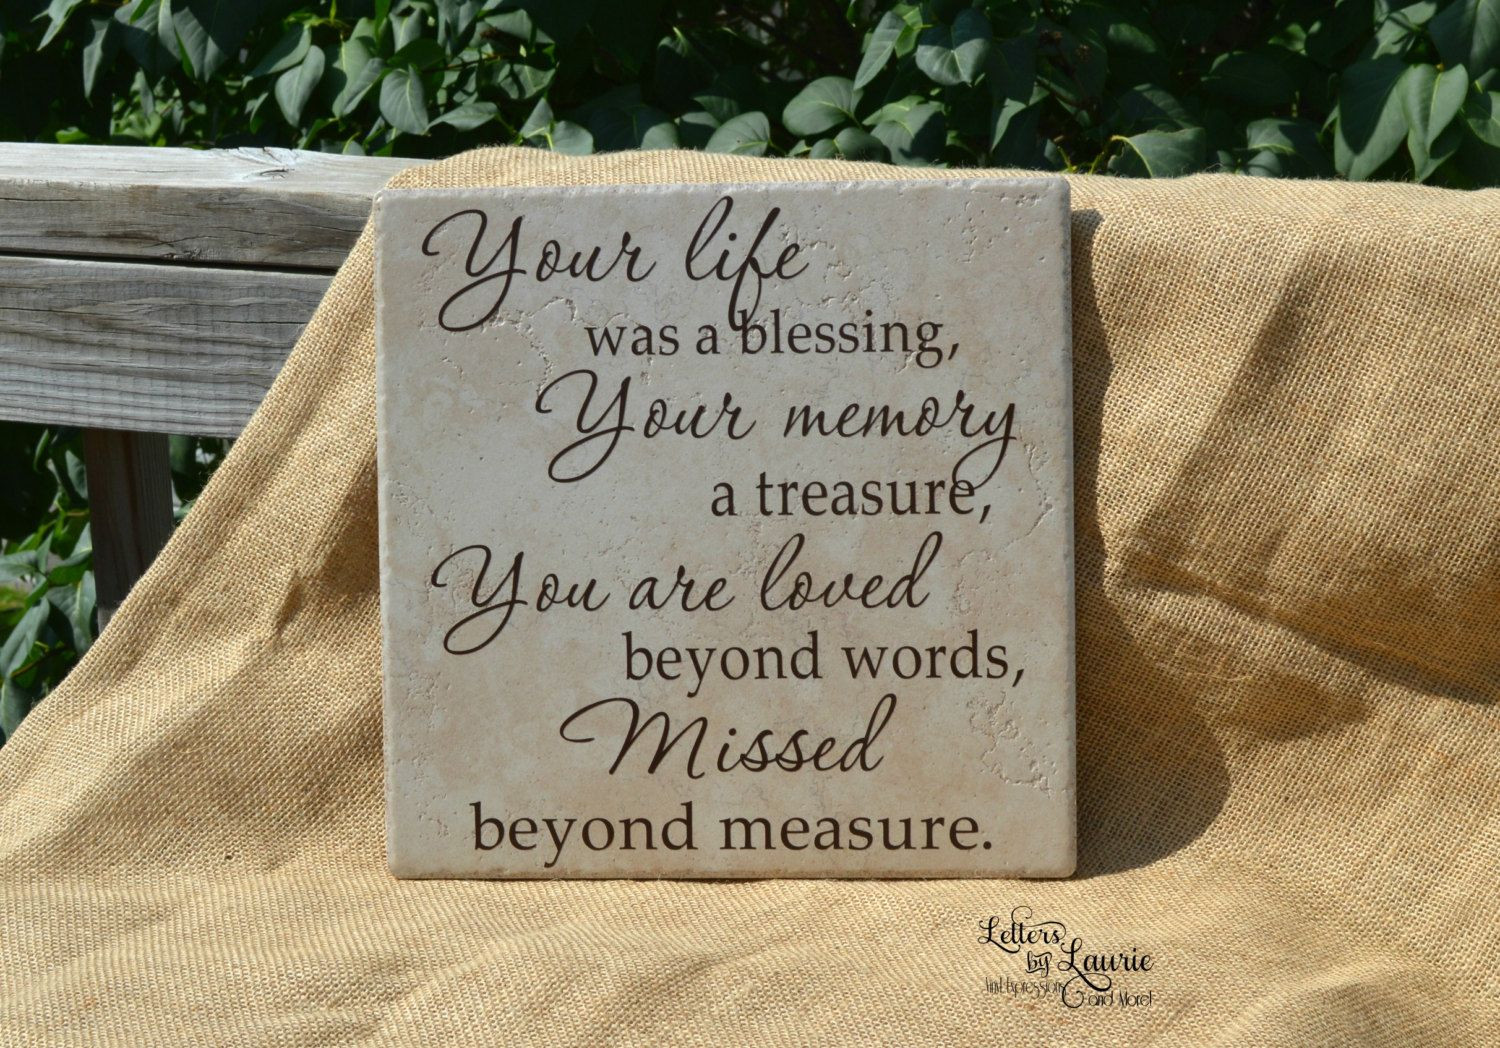 personalized memorial vases for weddings of in loving memory gift your life was a blessing loss of a loved one intended for your life was a blessing in loving memory gift loss of a loved one personalized memorial sign loss of a child by lettersbylaurie on etsy